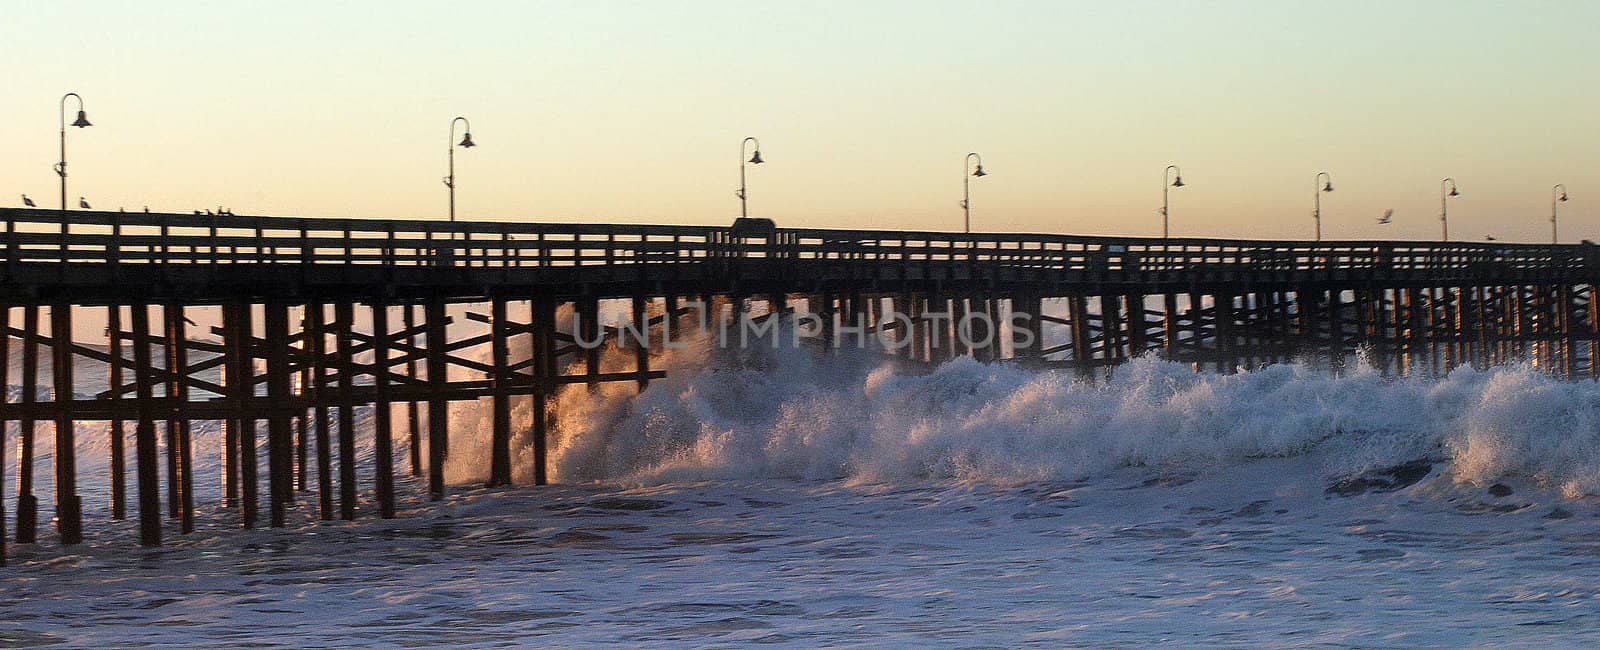 Ocean waves throughout at storm crashing into a wooden pier.